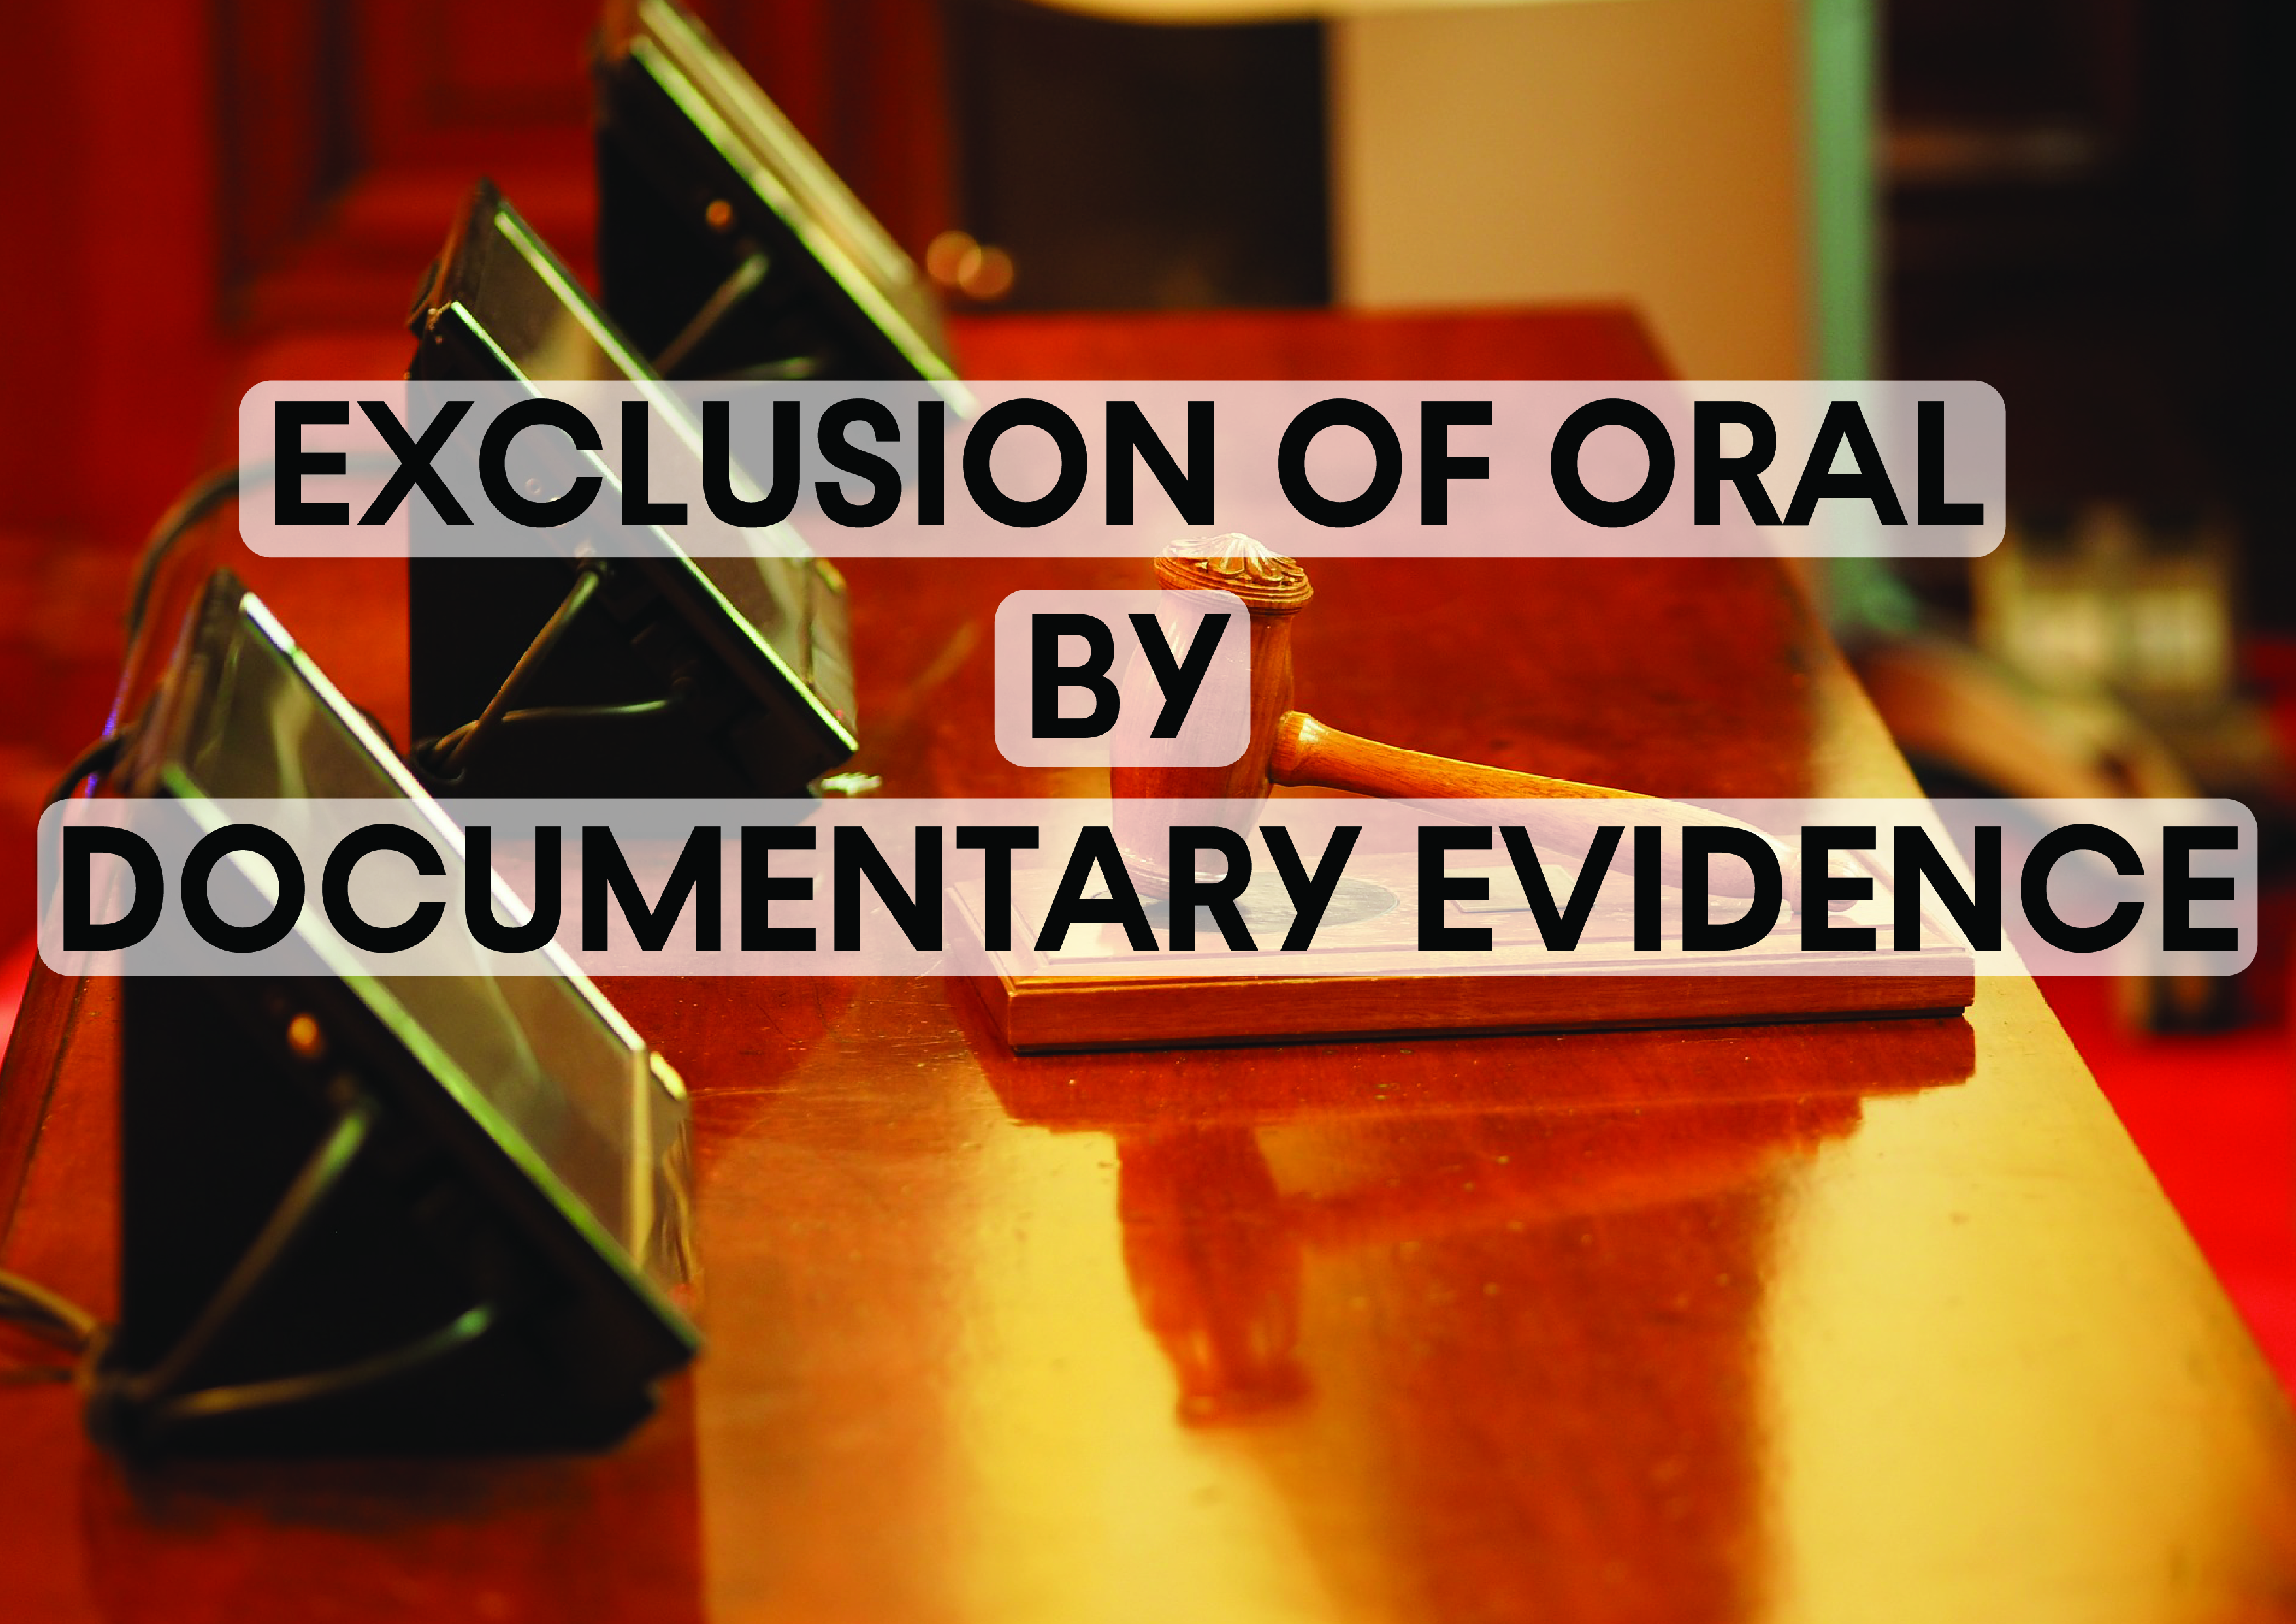 Exclusion of Oral evidence by Documentary Evidence